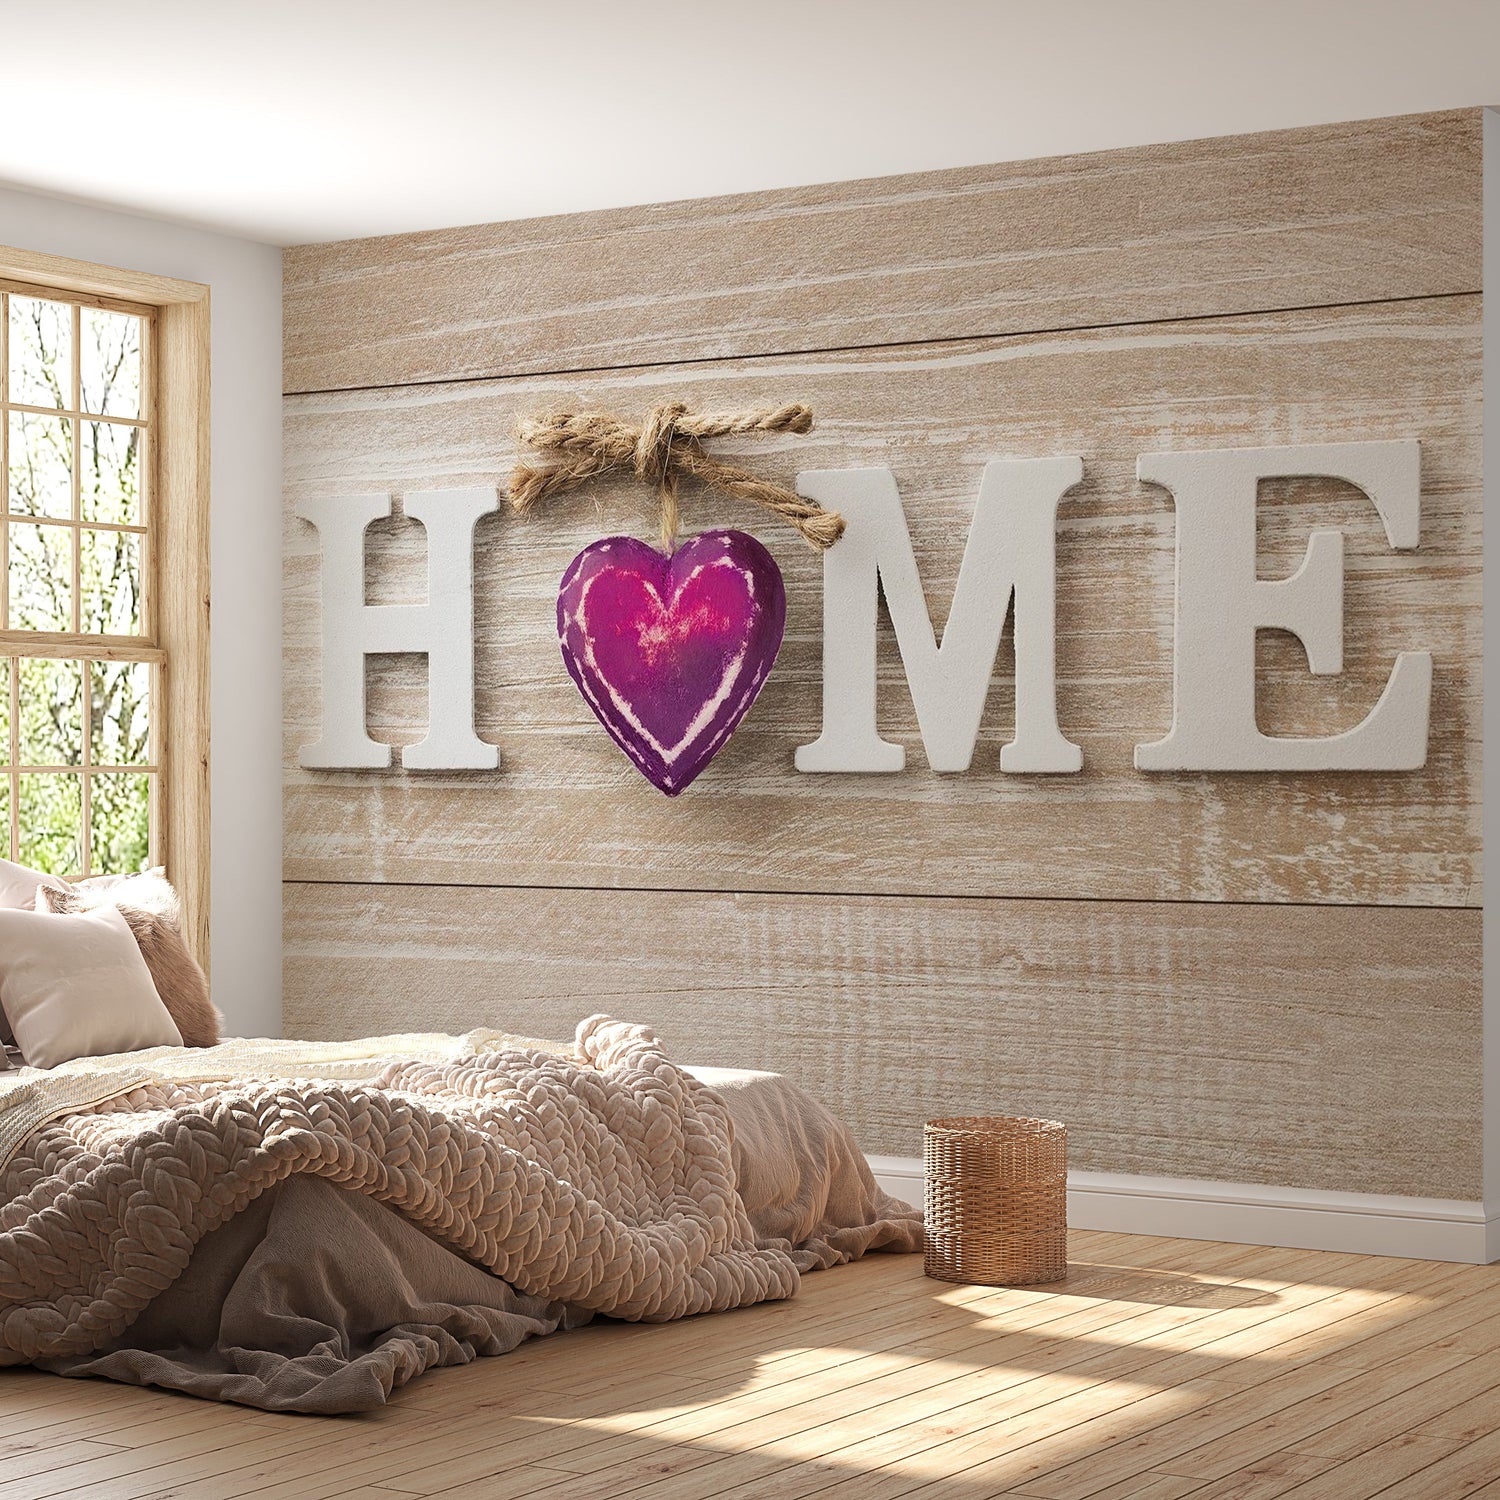 Peel & Stick Wall Mural - Home Violet Heart On Wood - Removable Wall Decals